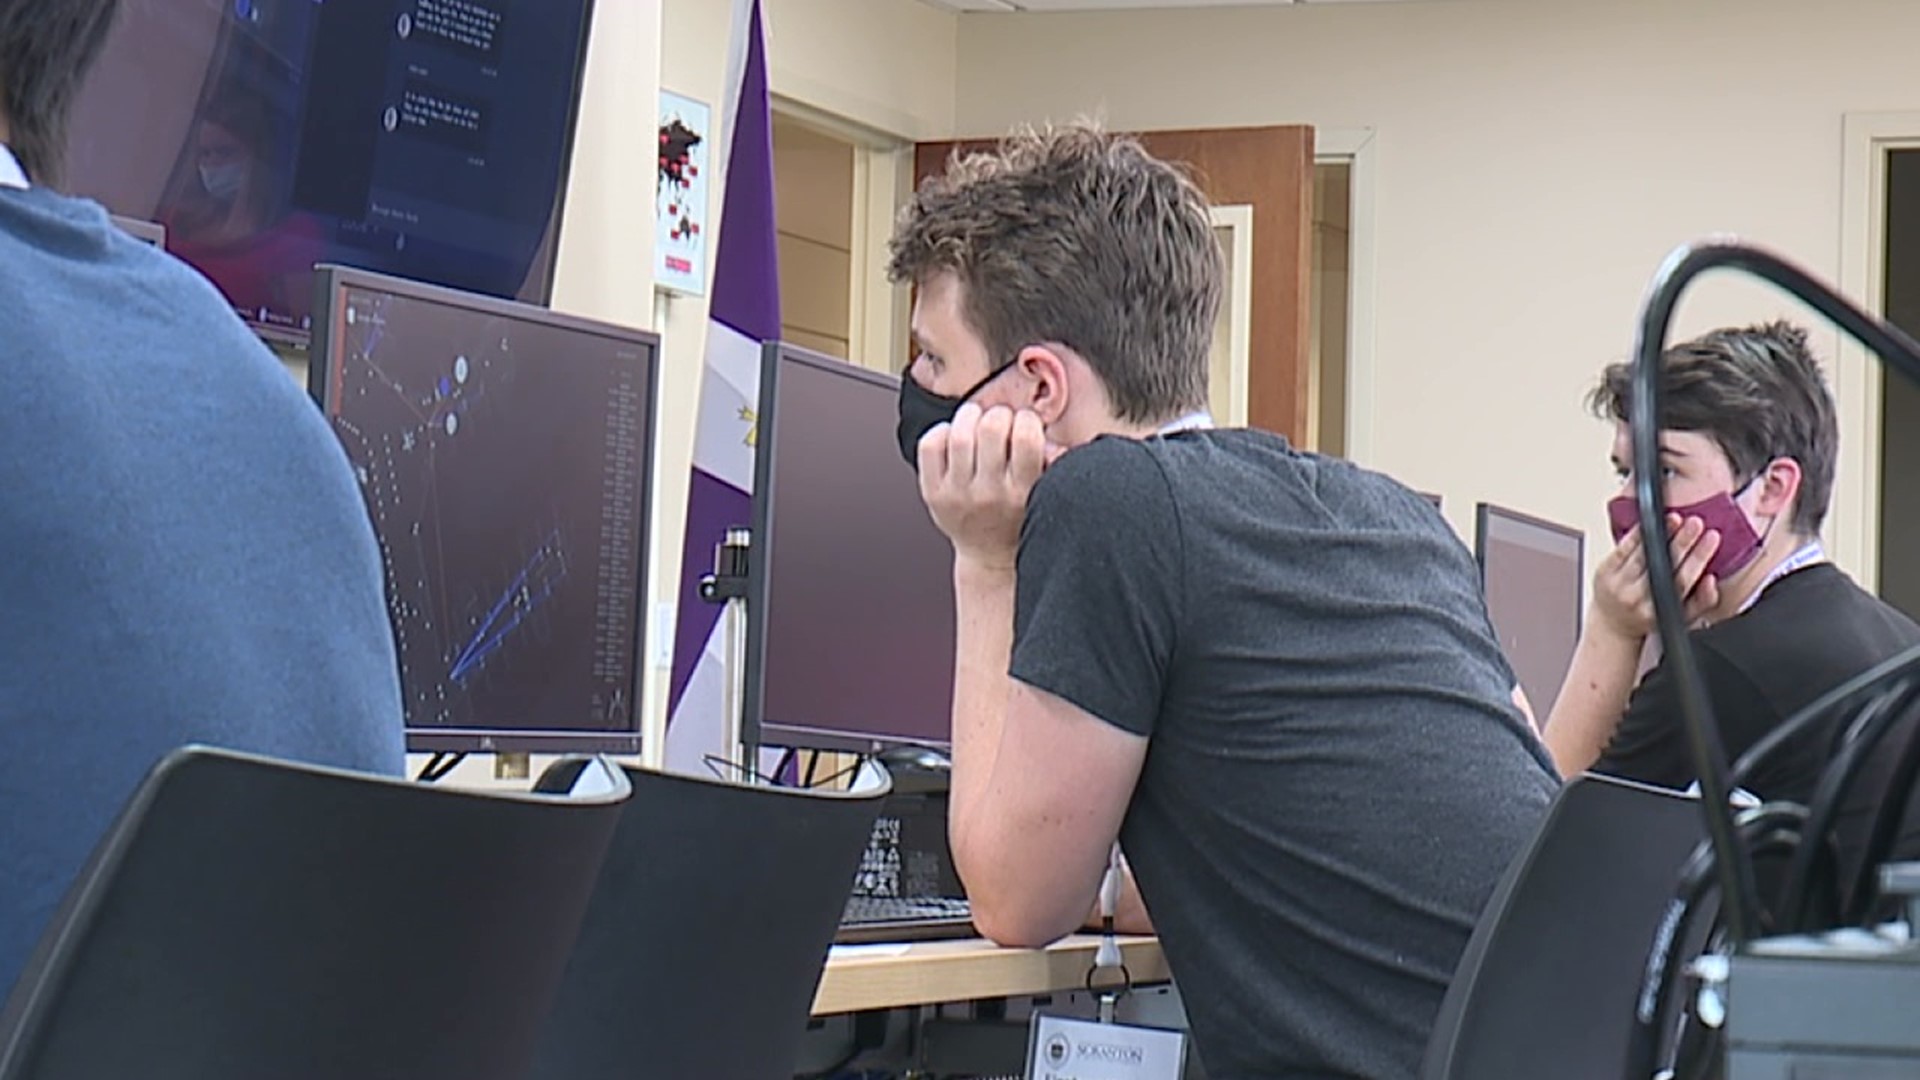 The University of Scranton is hosting a summer camp for high schoolers this week to teach them the skills they'd need to enter the field of cybersecurity.